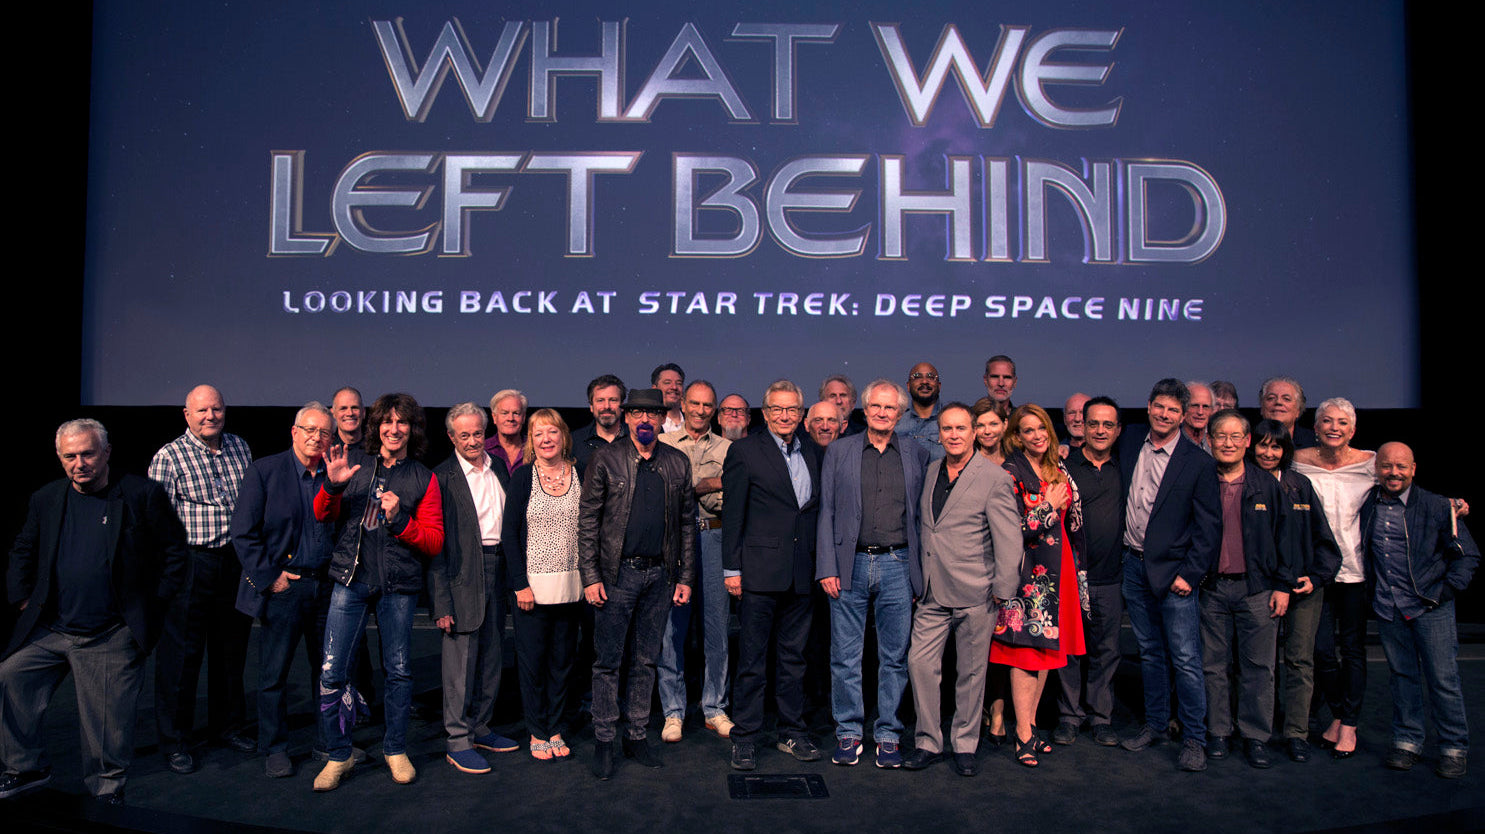 Shout! Studios Acquires Worldwide Rights To WHAT WE LEFT BEHIND:  LOOKING BACK AT STAR TREK: DEEP SPACE NINE